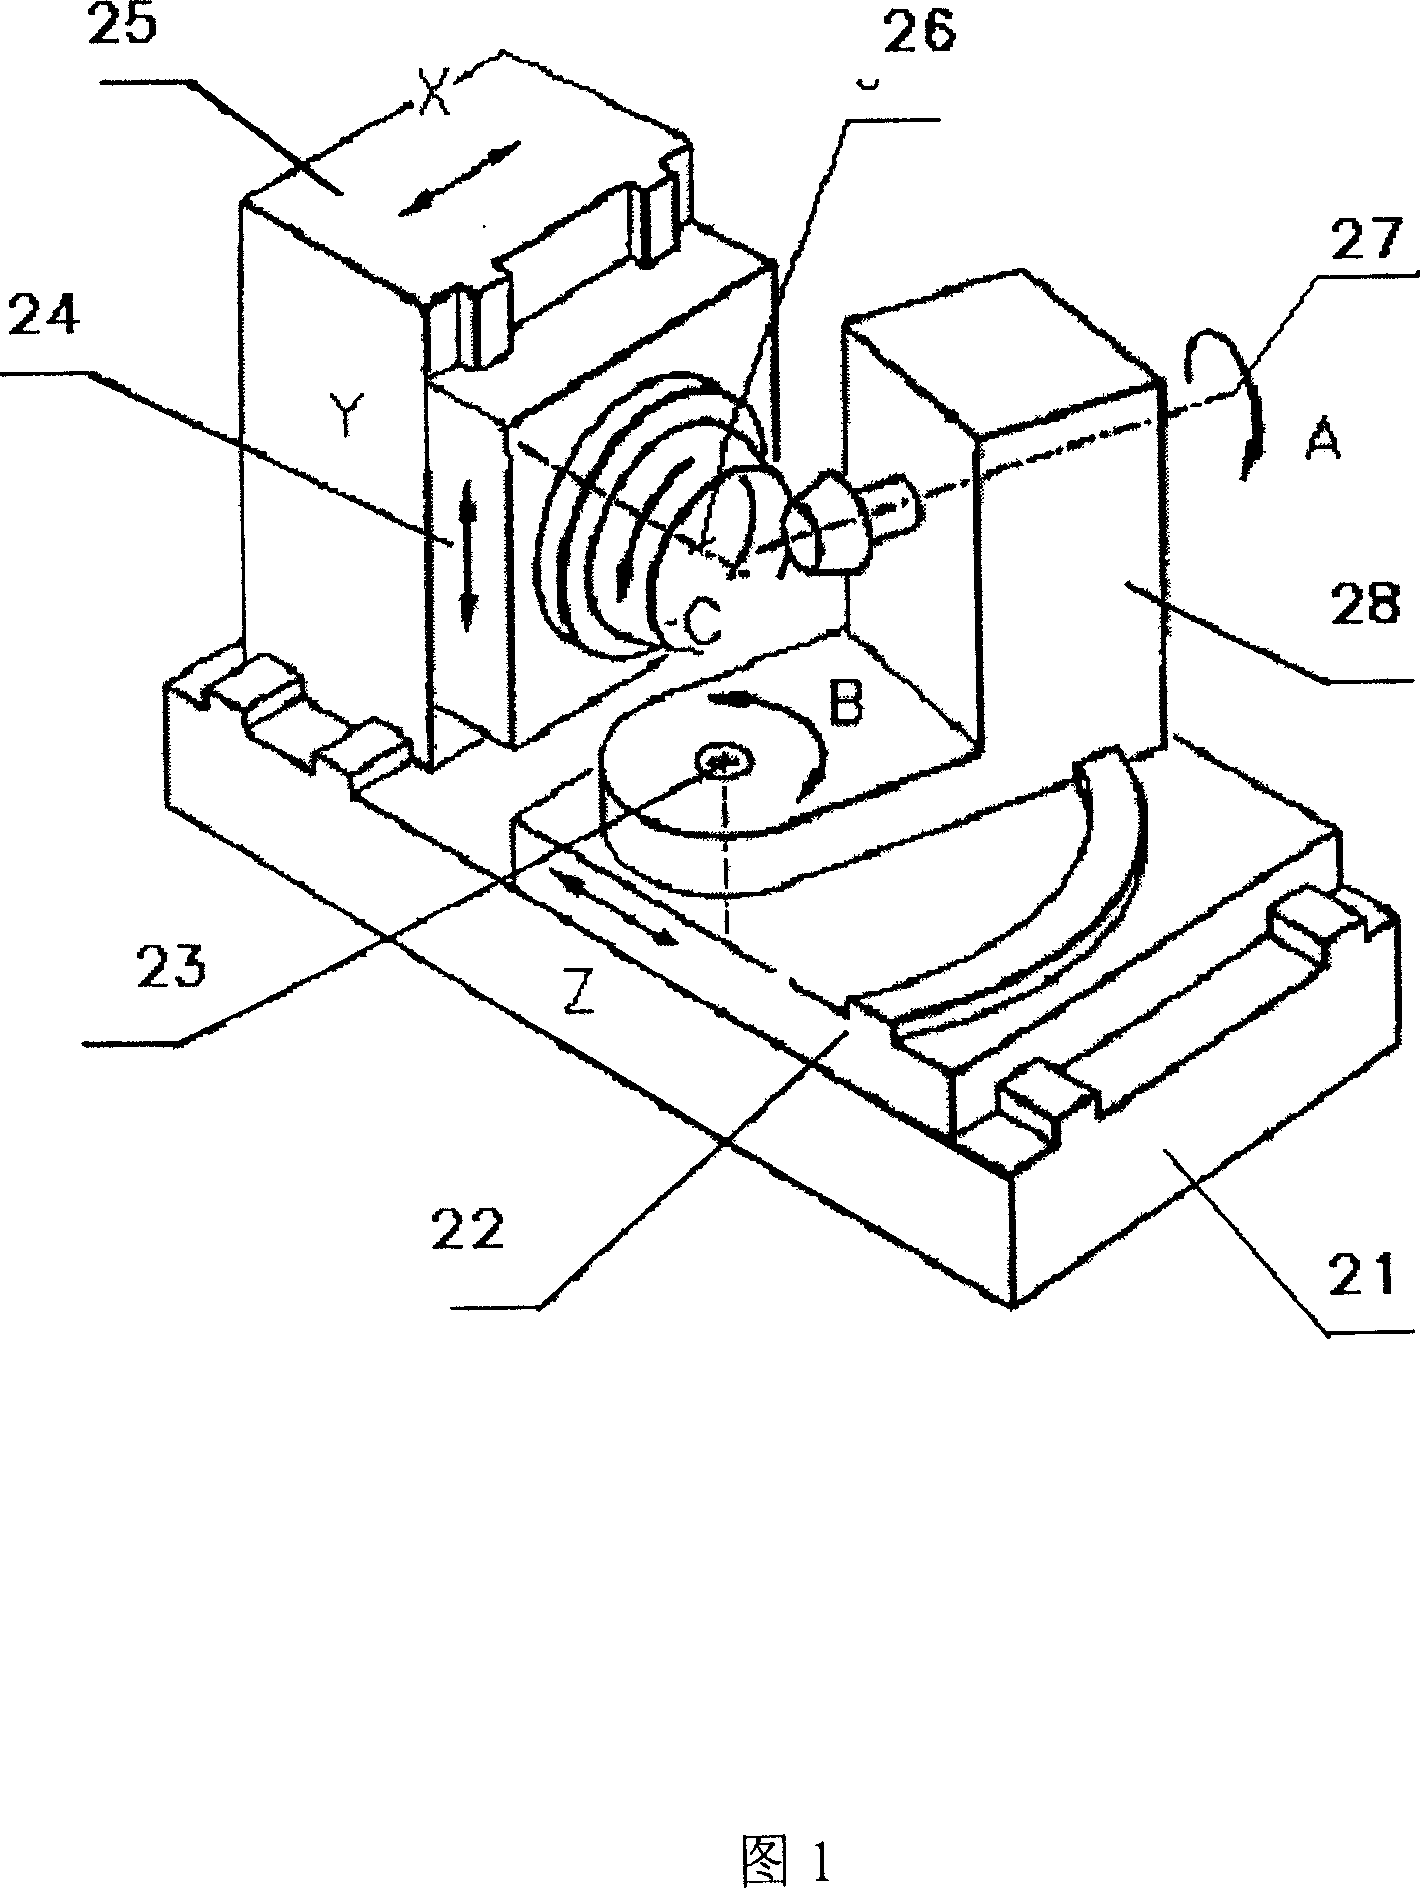 Machine tool for processing spiral taper gear with six axes, five linkage axes